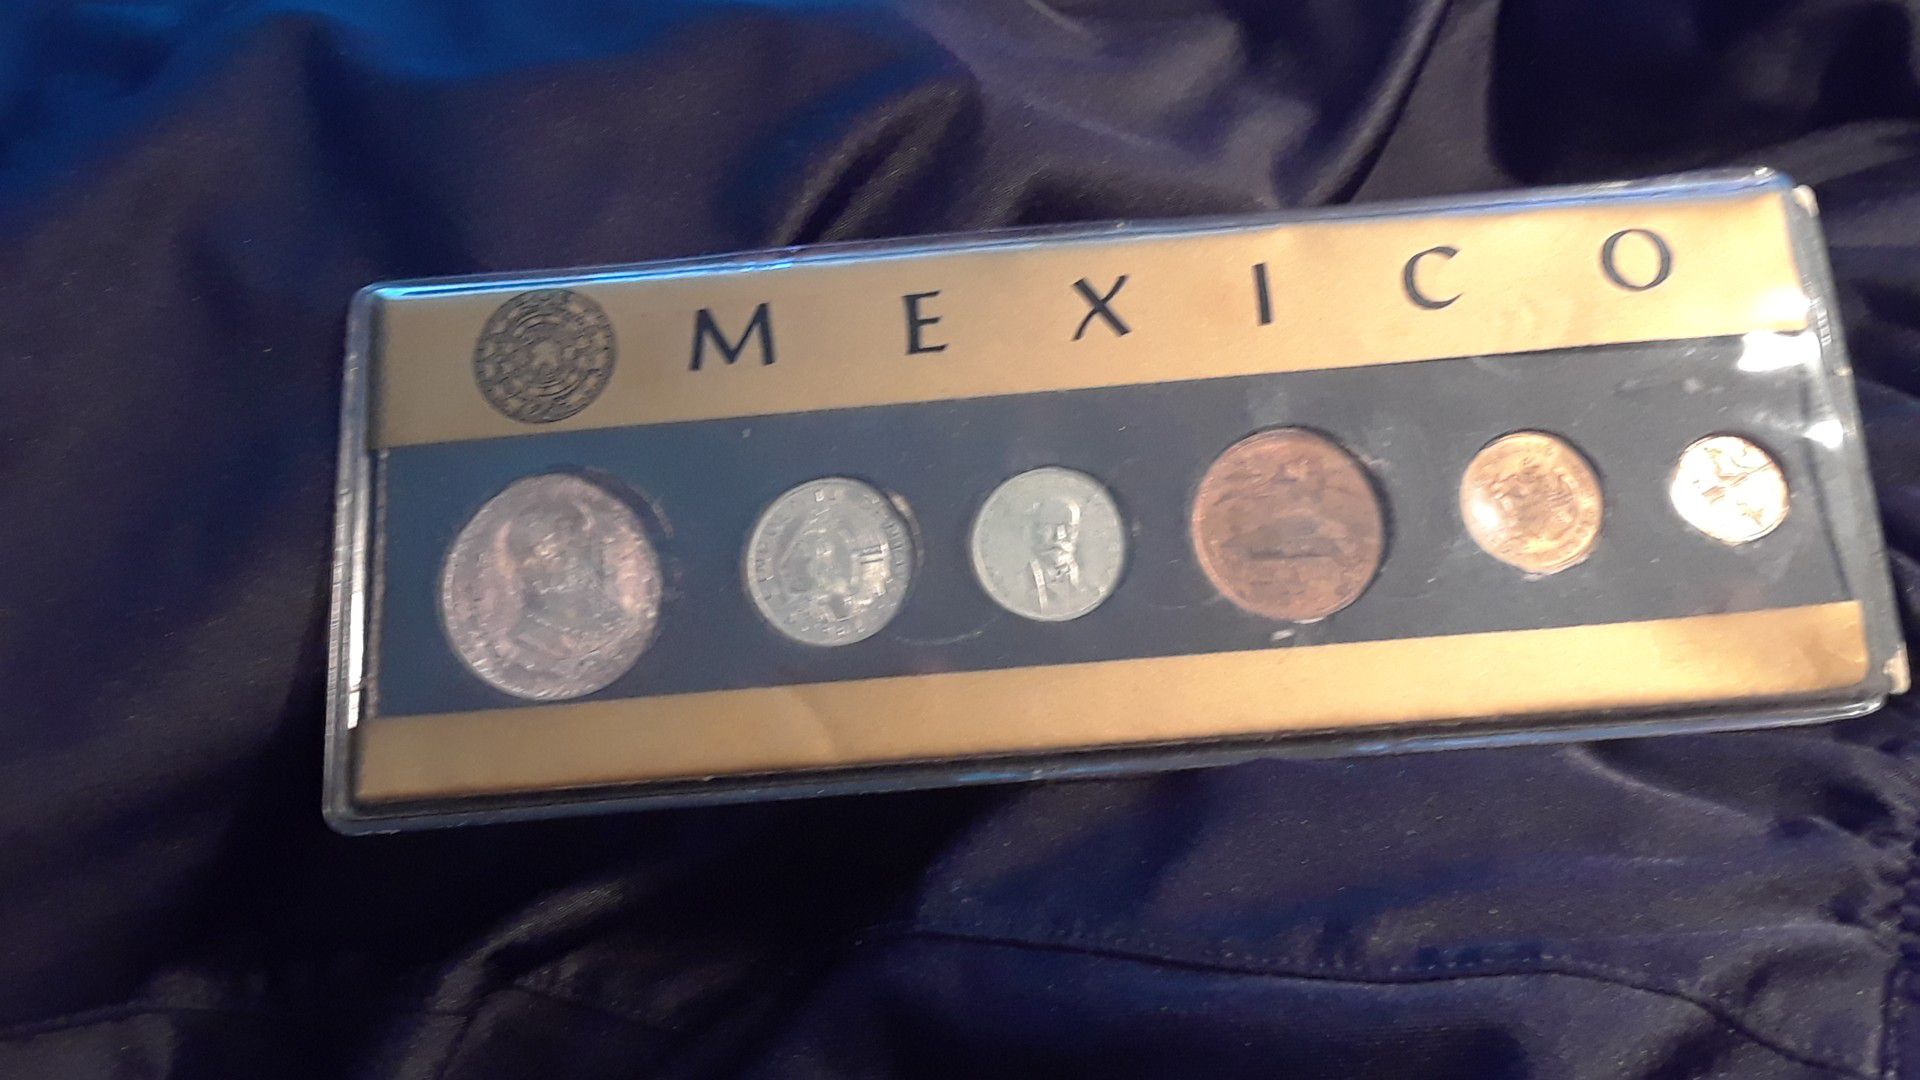 1964 coins from Mexico